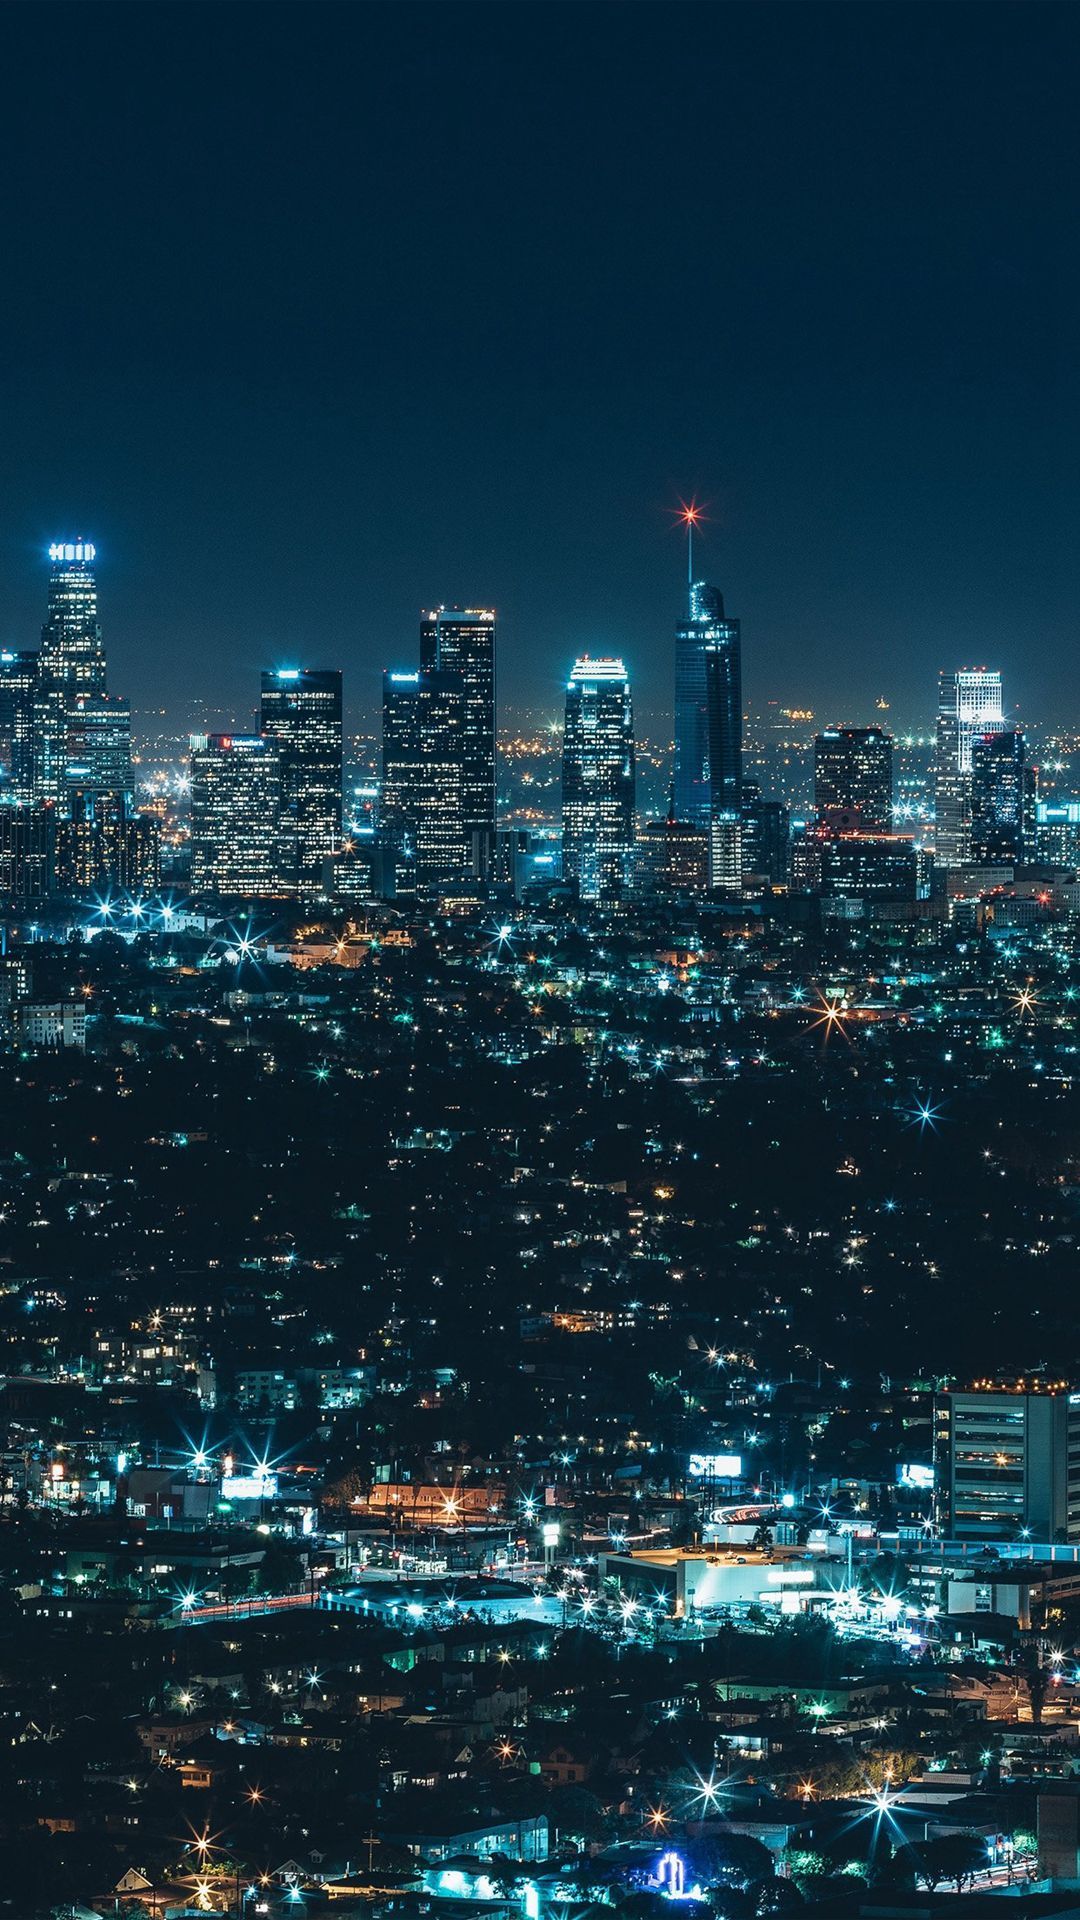 A city skyline at night with lights - Night, architecture, Los Angeles, city, skyline